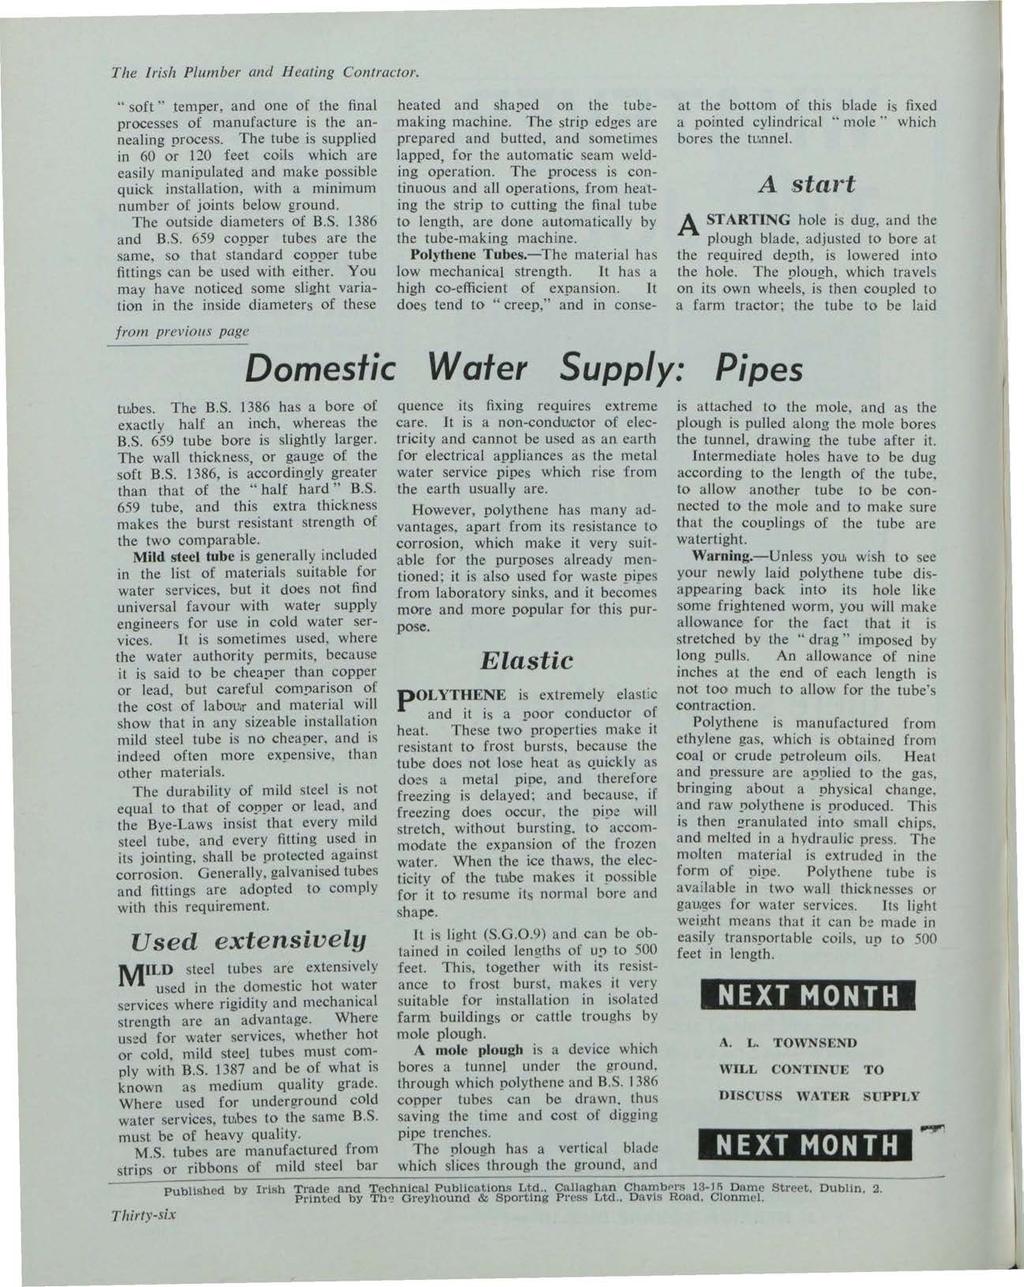 The Irish Plumber and Heating Contractor. Building Services News, Vol. 2, Iss. 12 [1963], Art. 1 " soft" temper, and one of the final processes of manufactur e is the annealing process.